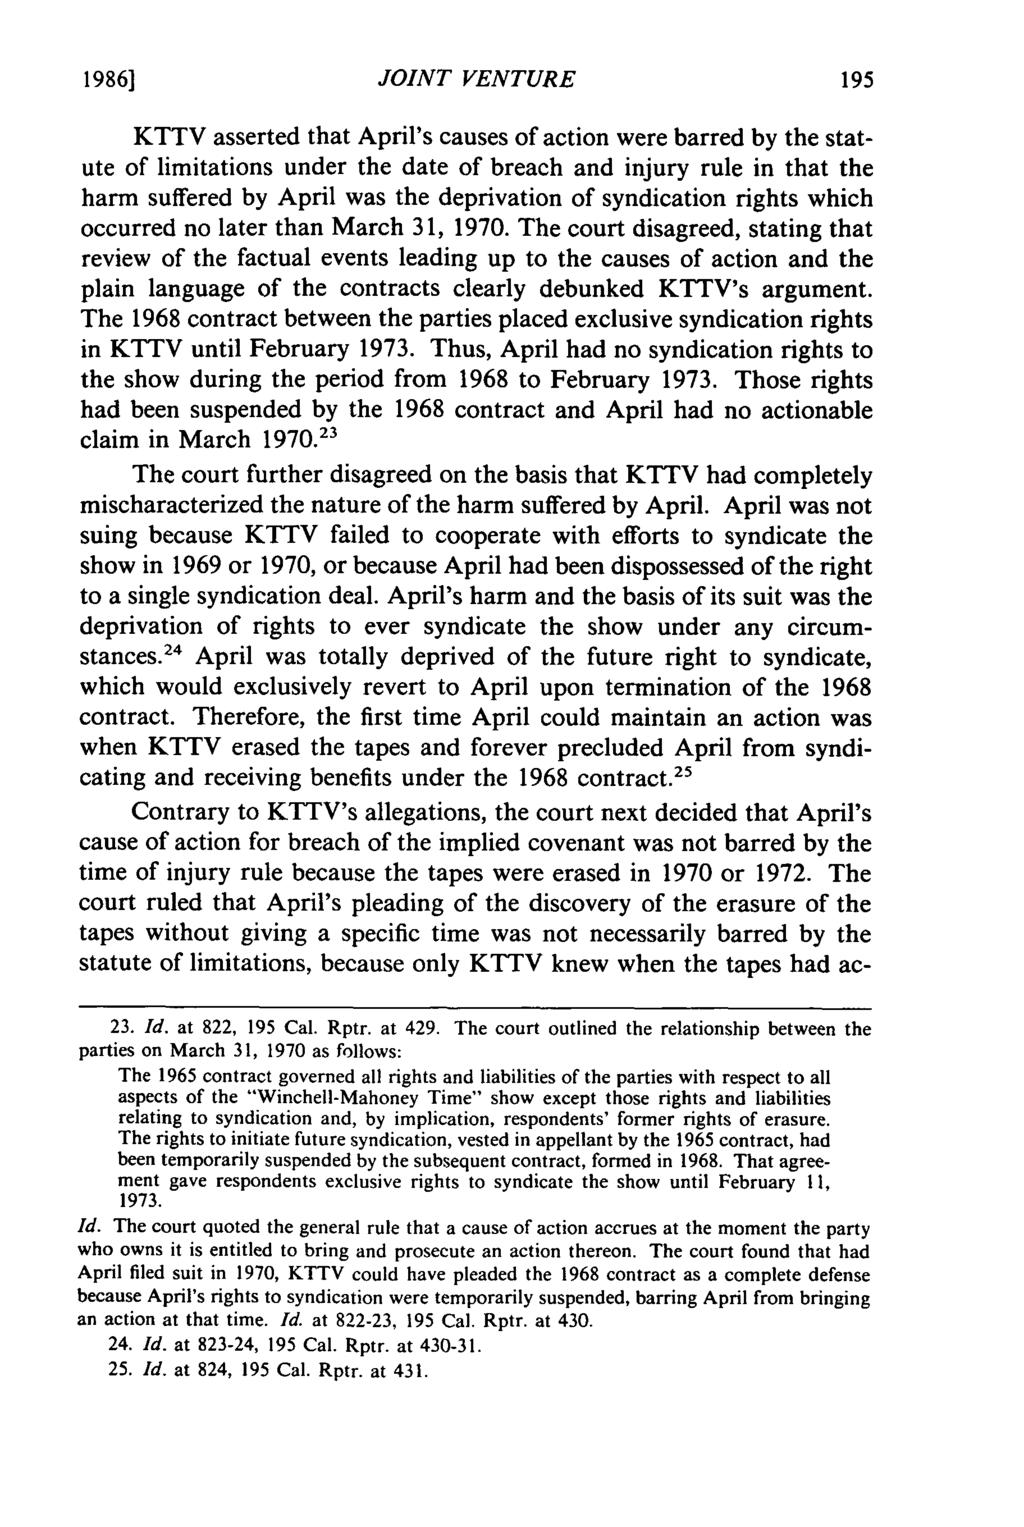 1986] JOINT VENTURE KTTV asserted that April's causes of action were barred by the statute of limitations under the date of breach and injury rule in that the harm suffered by April was the